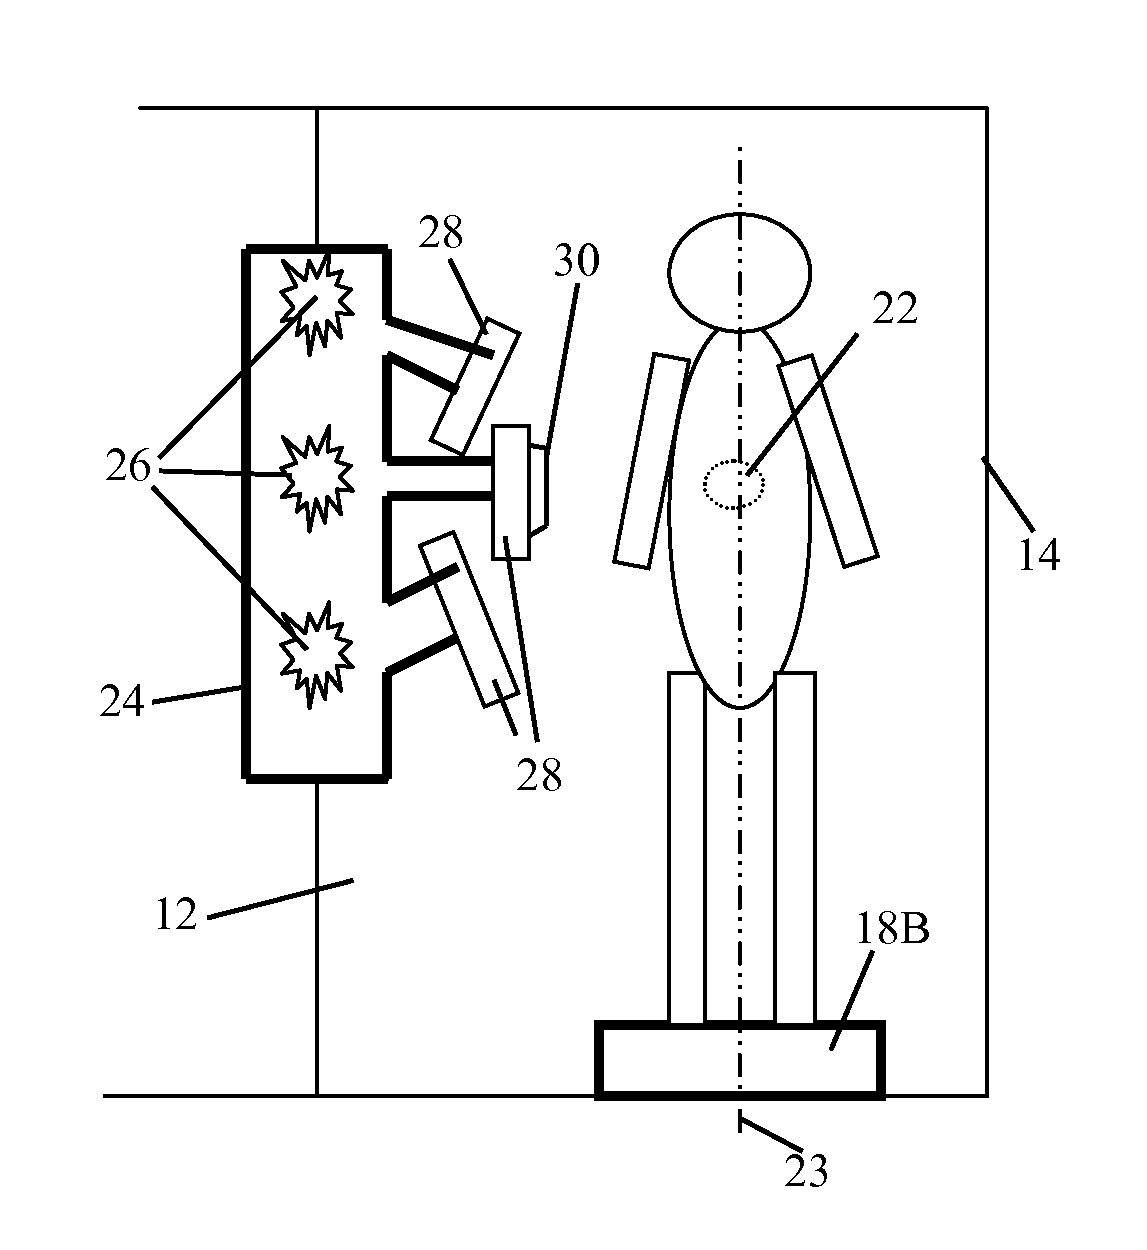 External beam radiation therapy for a plurality of compartments